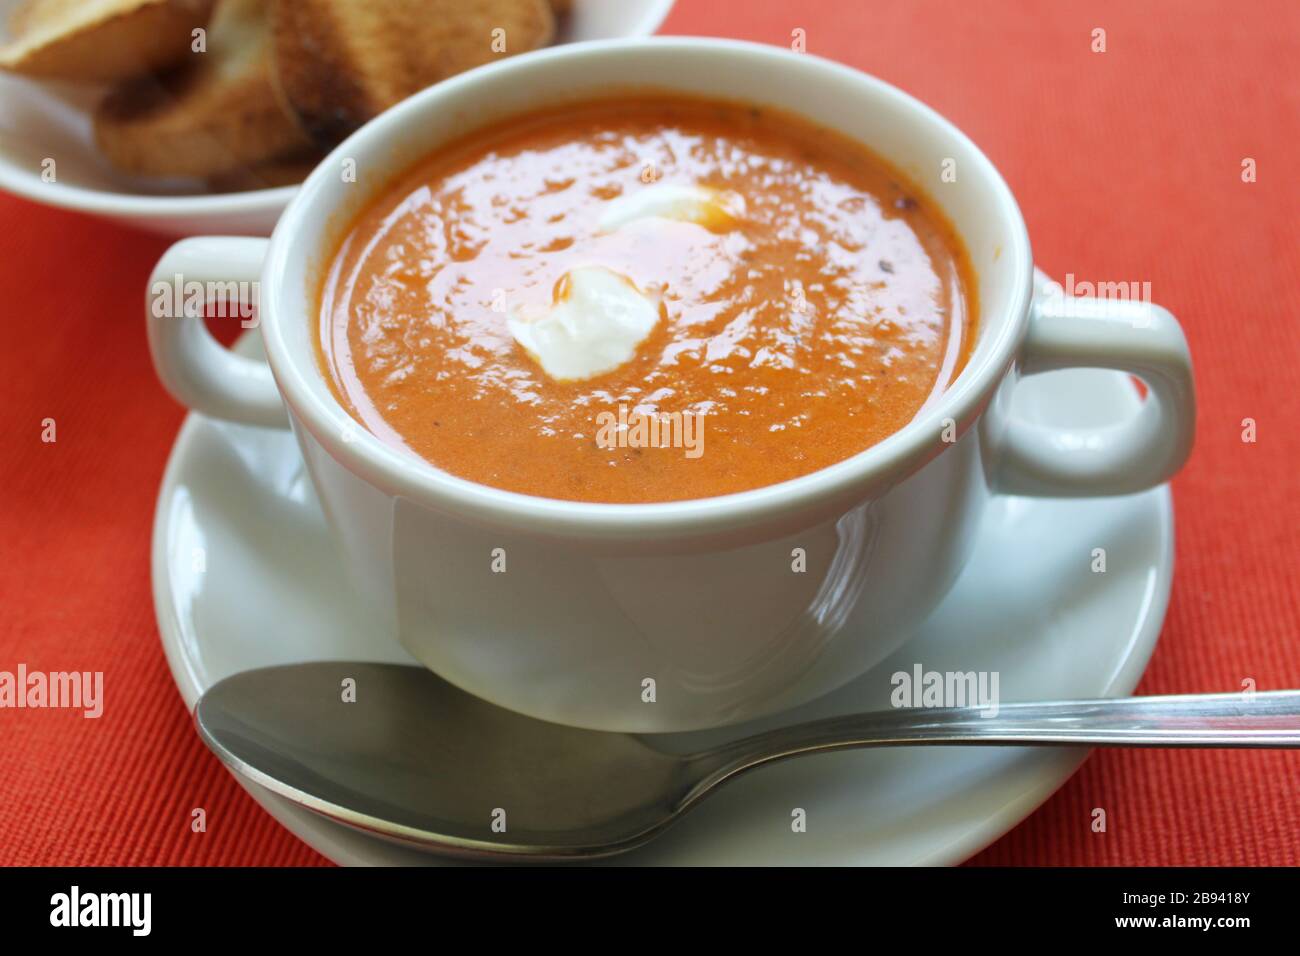 Tomato cream soup hot orange color close up view on bright red background. Selective focus. Copy space Stock Photo